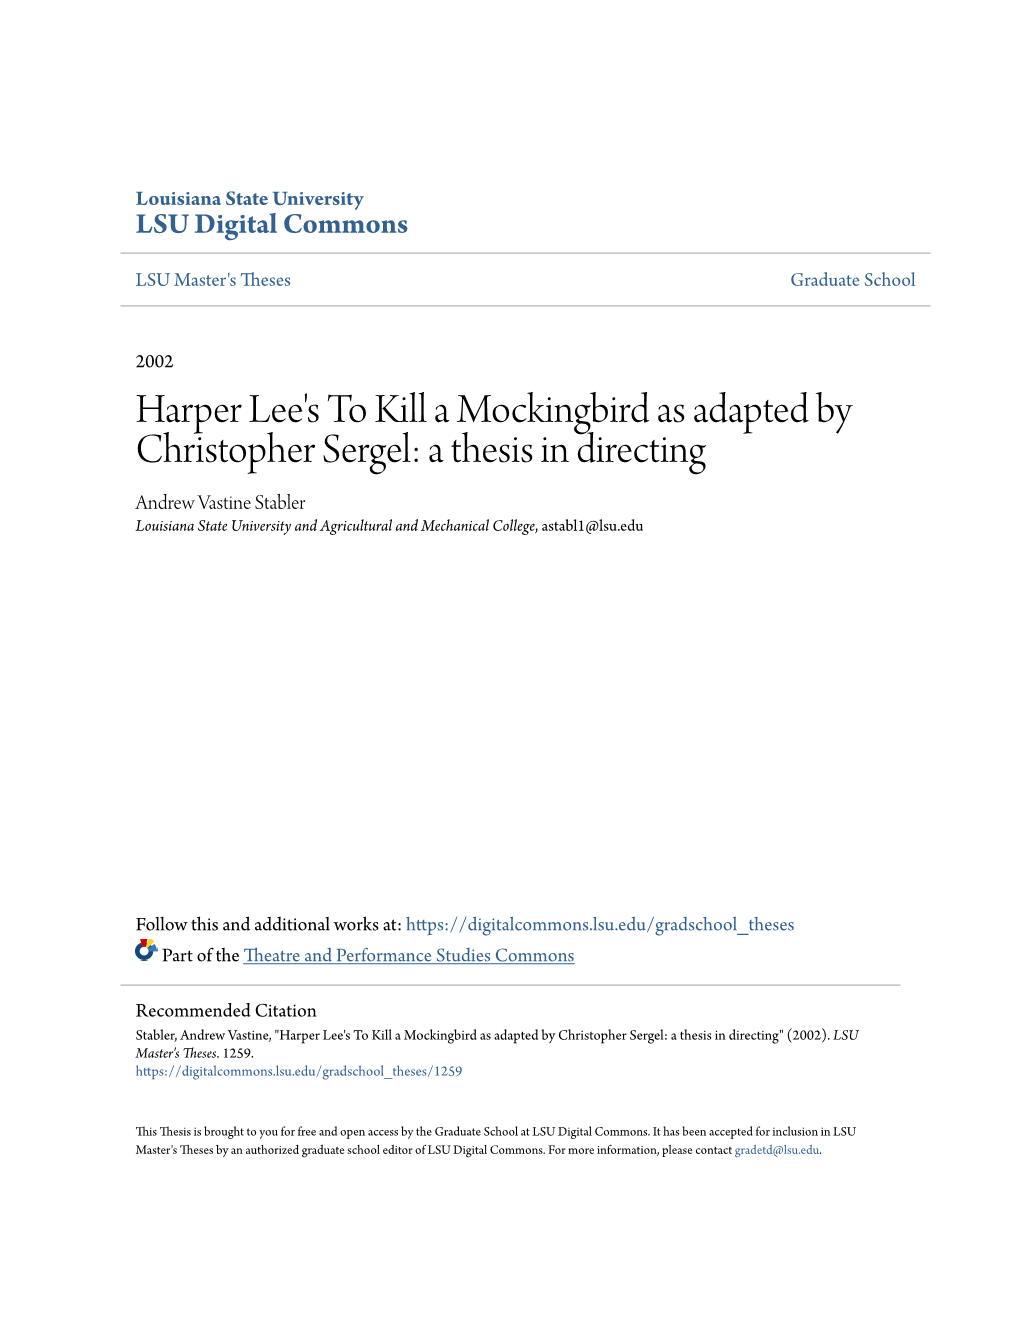 Harper Lee's to Kill a Mockingbird As Adapted By